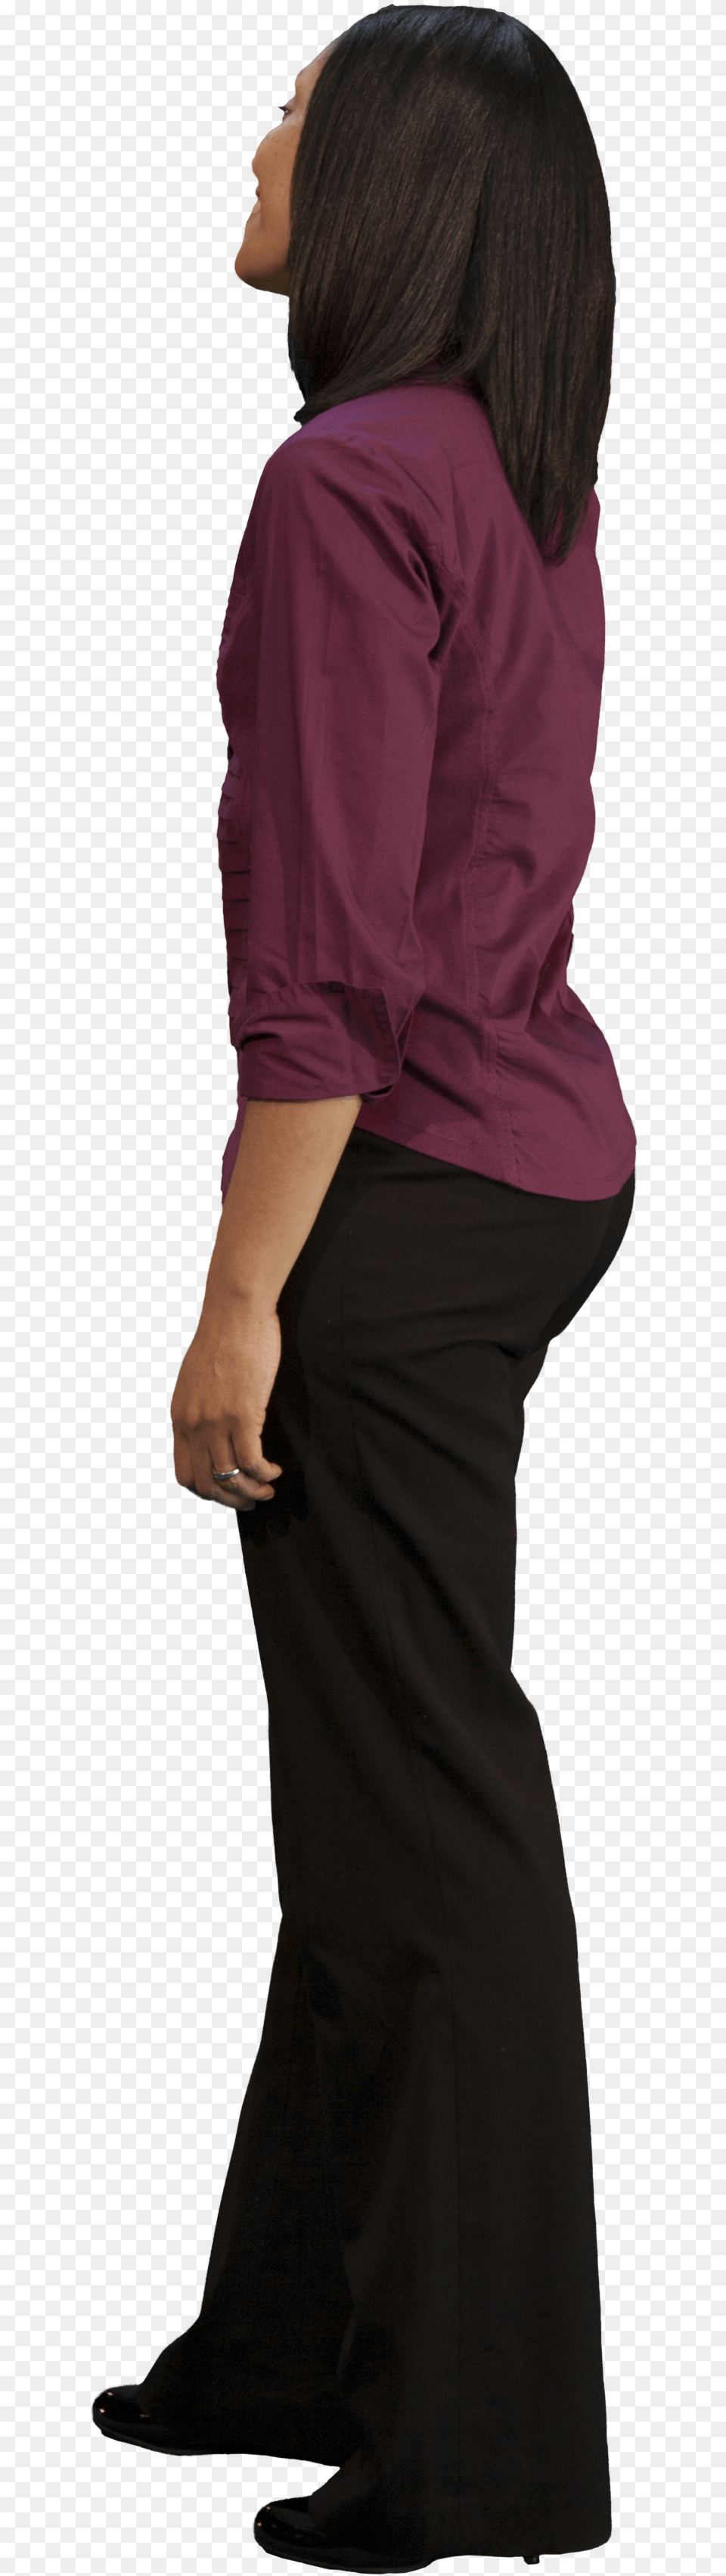 Cut Out People Work V People Cut Out Standing, Blouse, Person, Pants, Long Sleeve Png